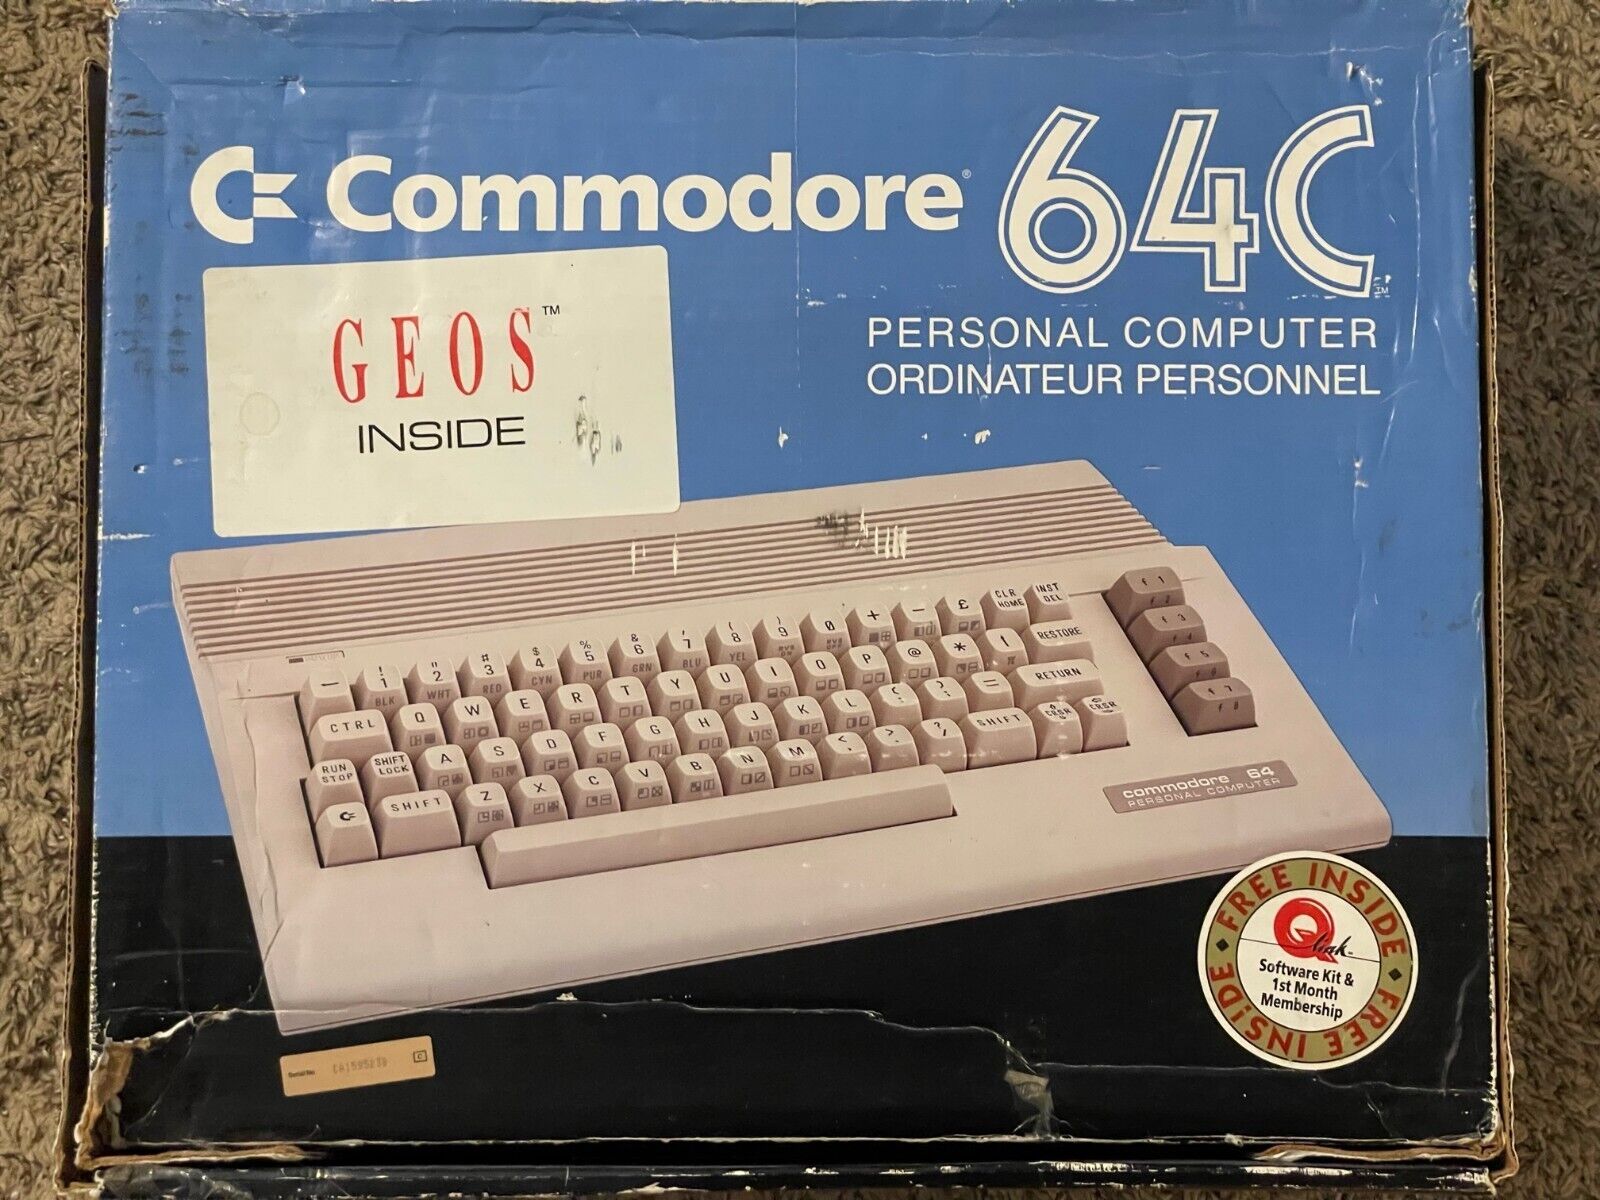 BOXED Commodore 64C Personal Computer + Manuals + Joystick + Power Supply - READ